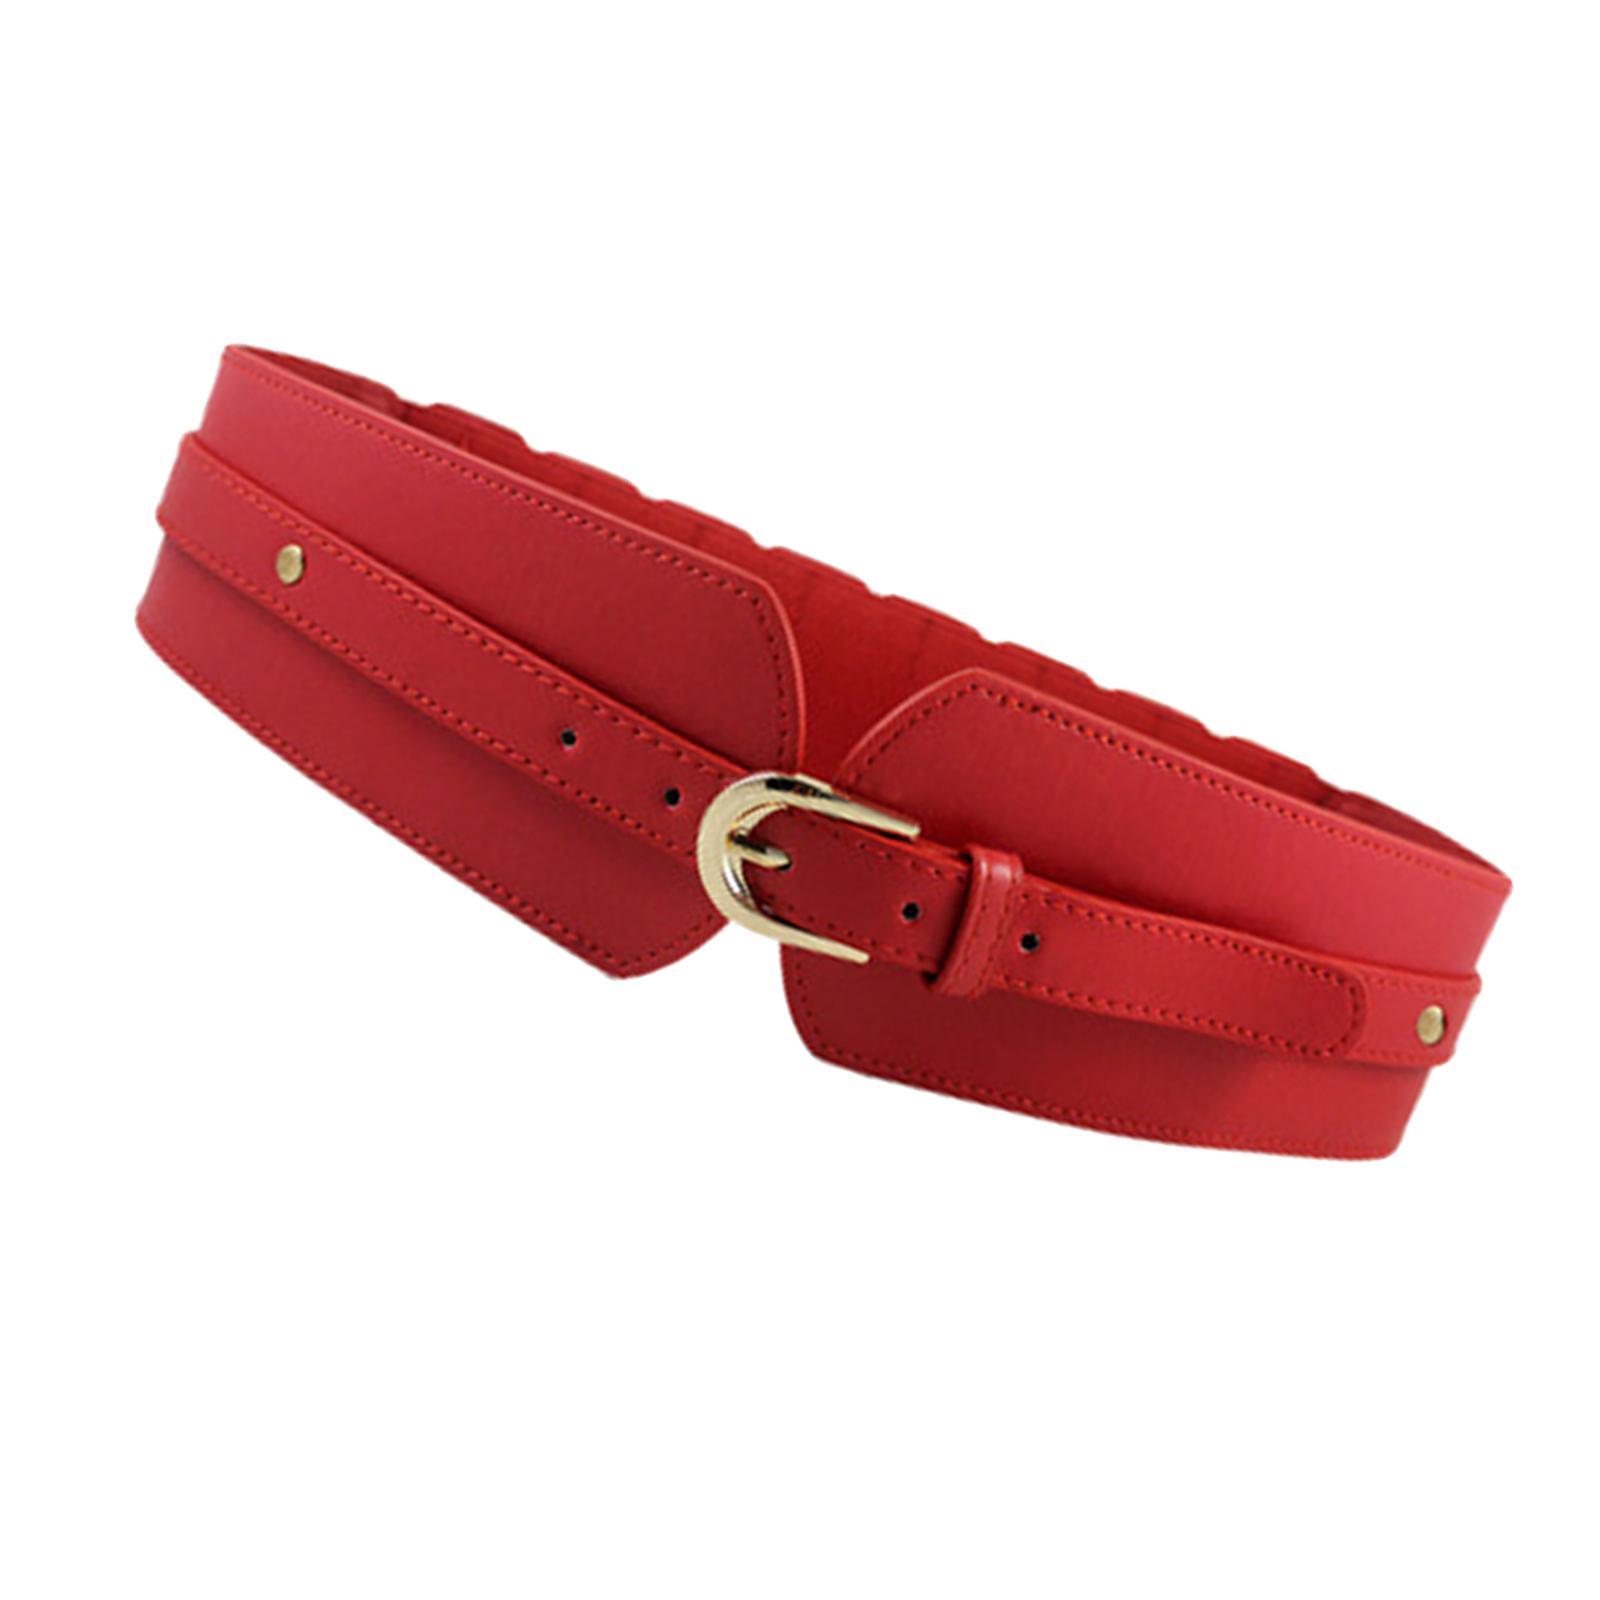 Luxury Women Wide Stretchy Belt PU Leather Fashion for Ladies Coat Blouse